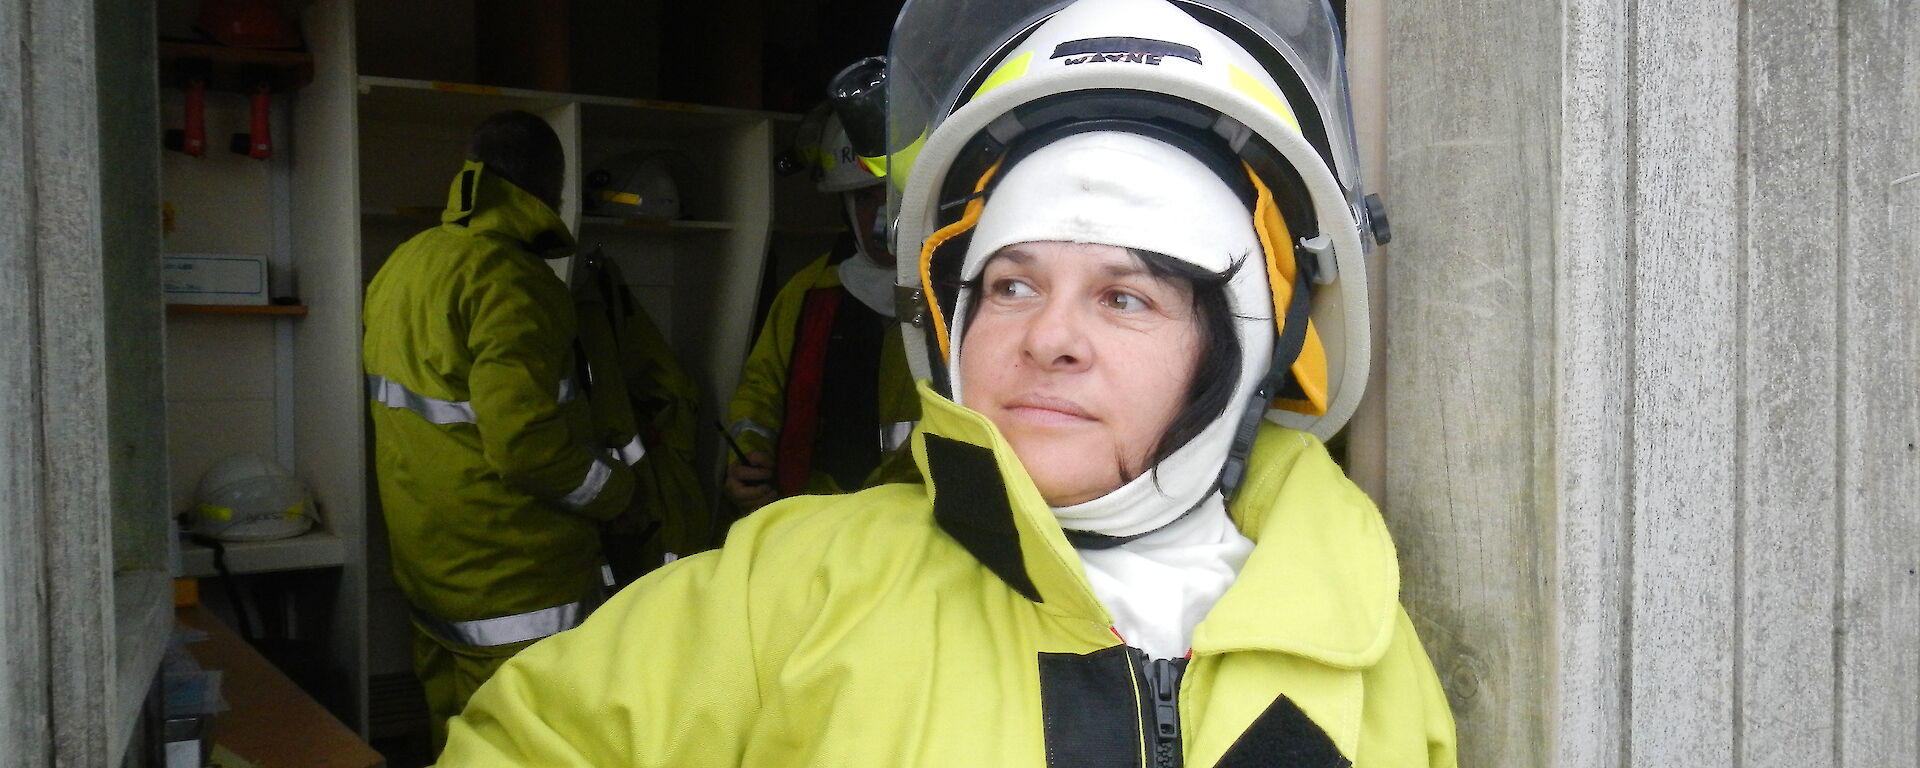 Maria dressed in fire fighting uniform